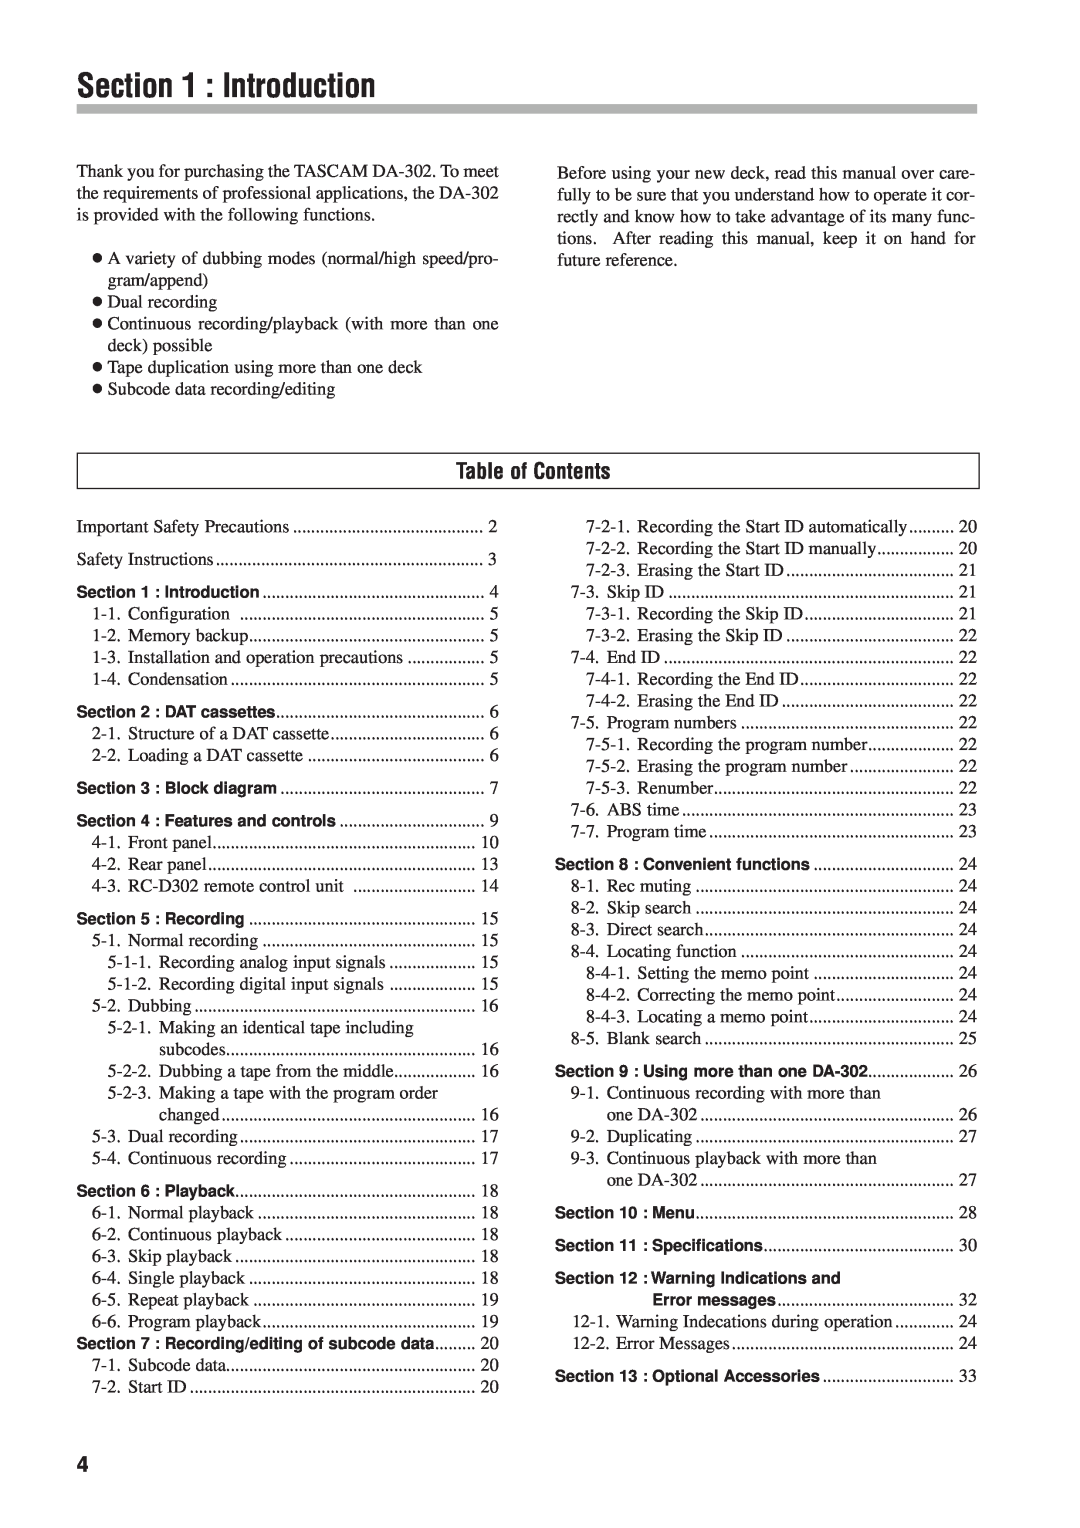 Tascam DA-302 owner manual Introduction, Table of Contents 